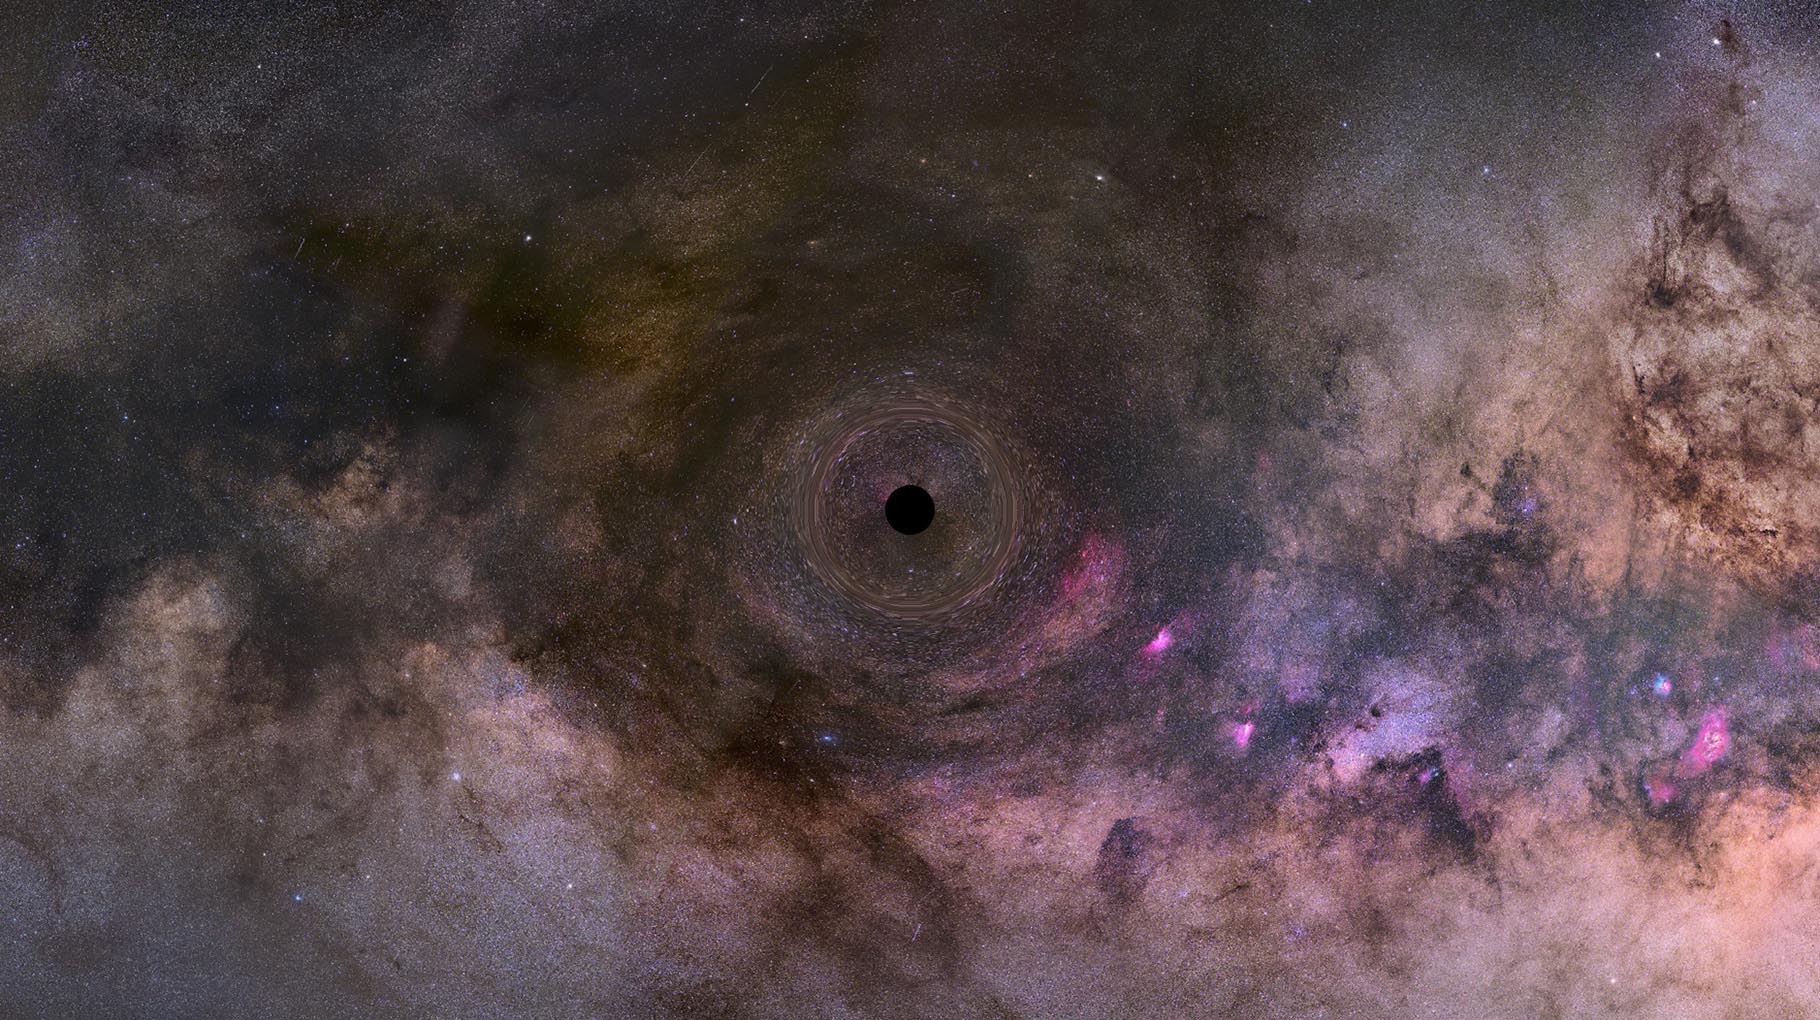 This is an illustration of a close-up look at a black hole drifting through our Milky Way galaxy. The black hole is the crushed remnant of a massive star that exploded as a supernova. The surviving core is several times the mass of our Sun. The black hole traps light due to its intense gravitational field. 